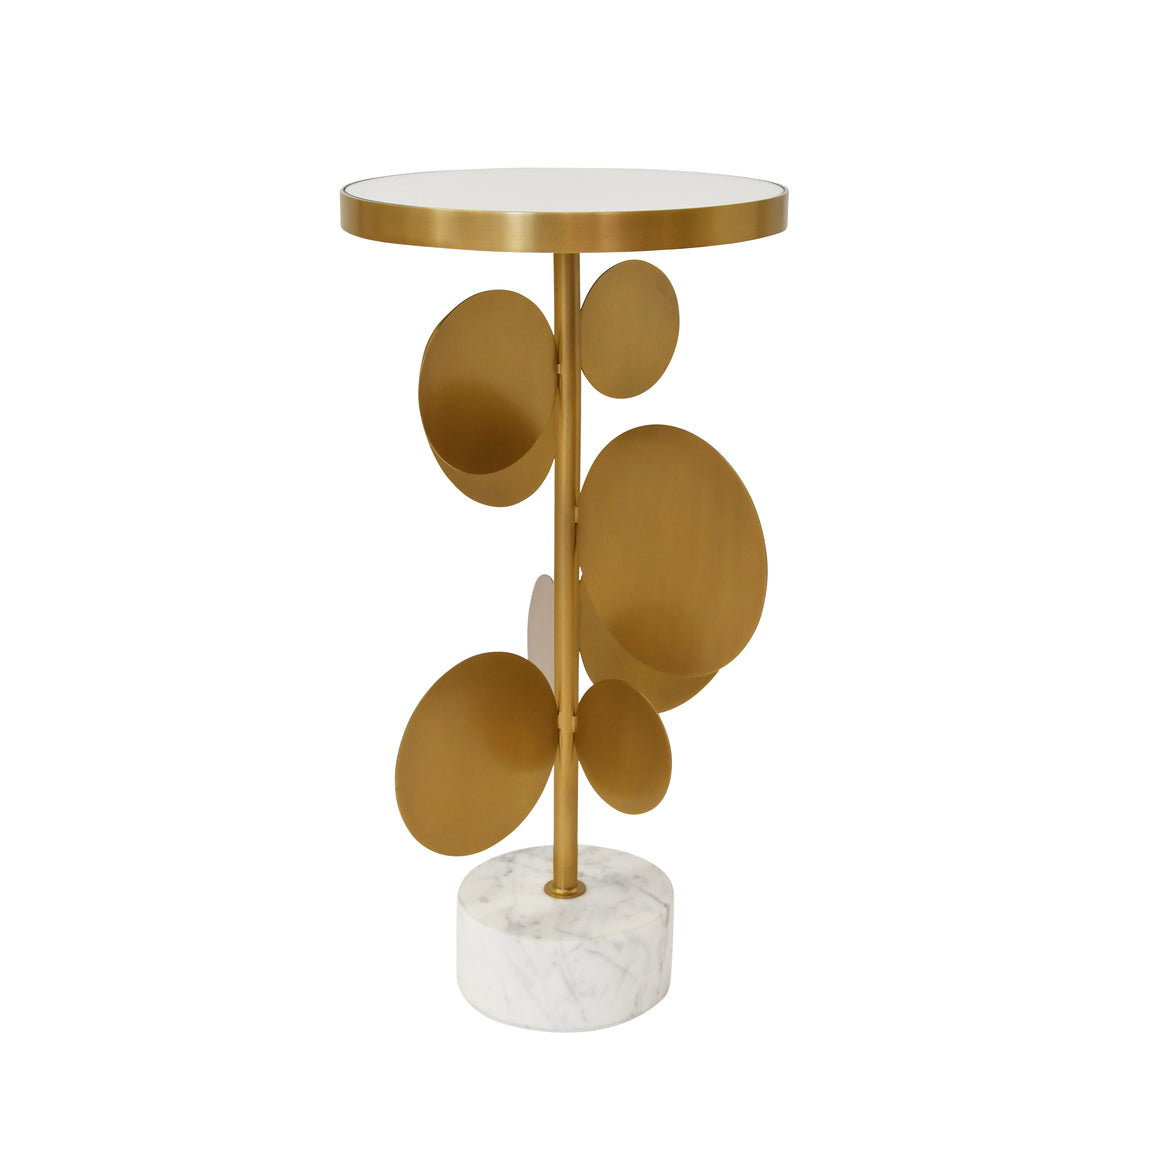 Round Brass Side Table Featuring Base with Array of Antique Brass Discs, White Marble Brass Base and Inset Mirror